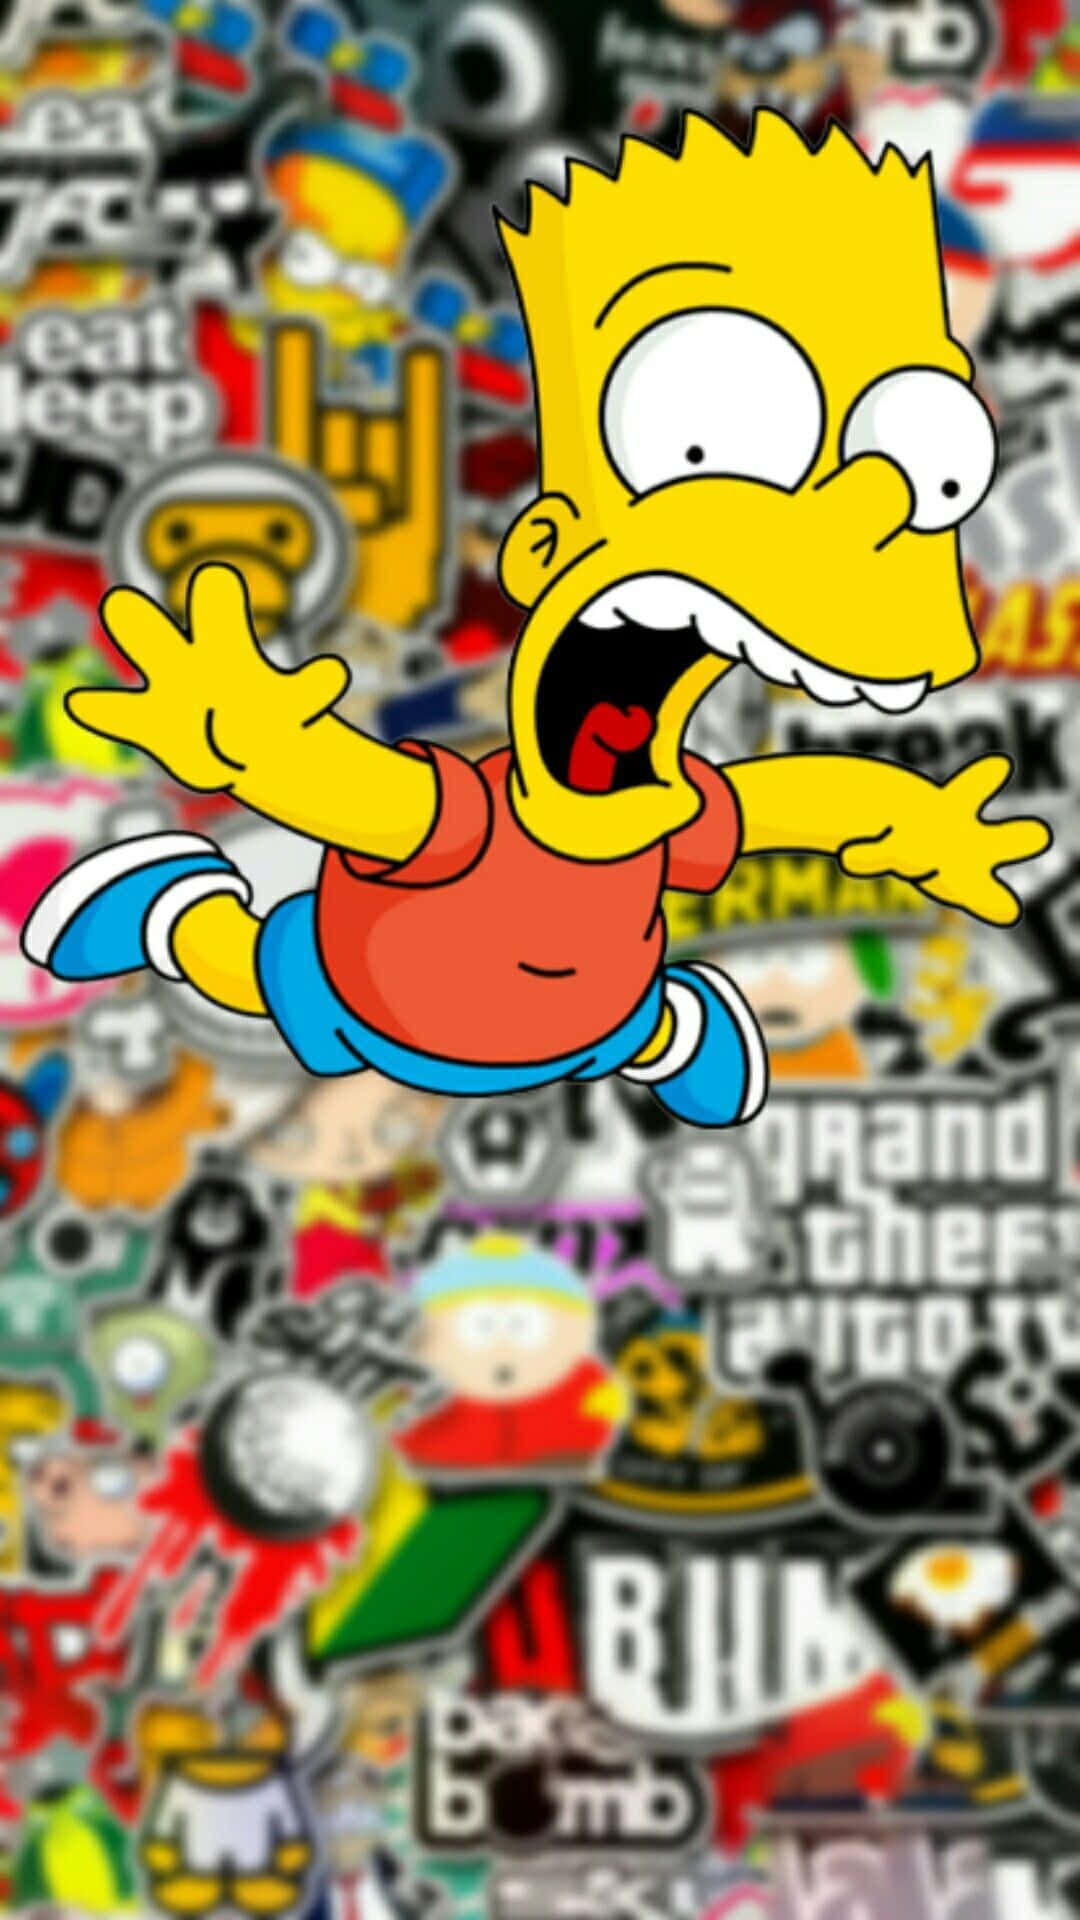 Catchy as ever - "Dope Simpsons" Wallpaper